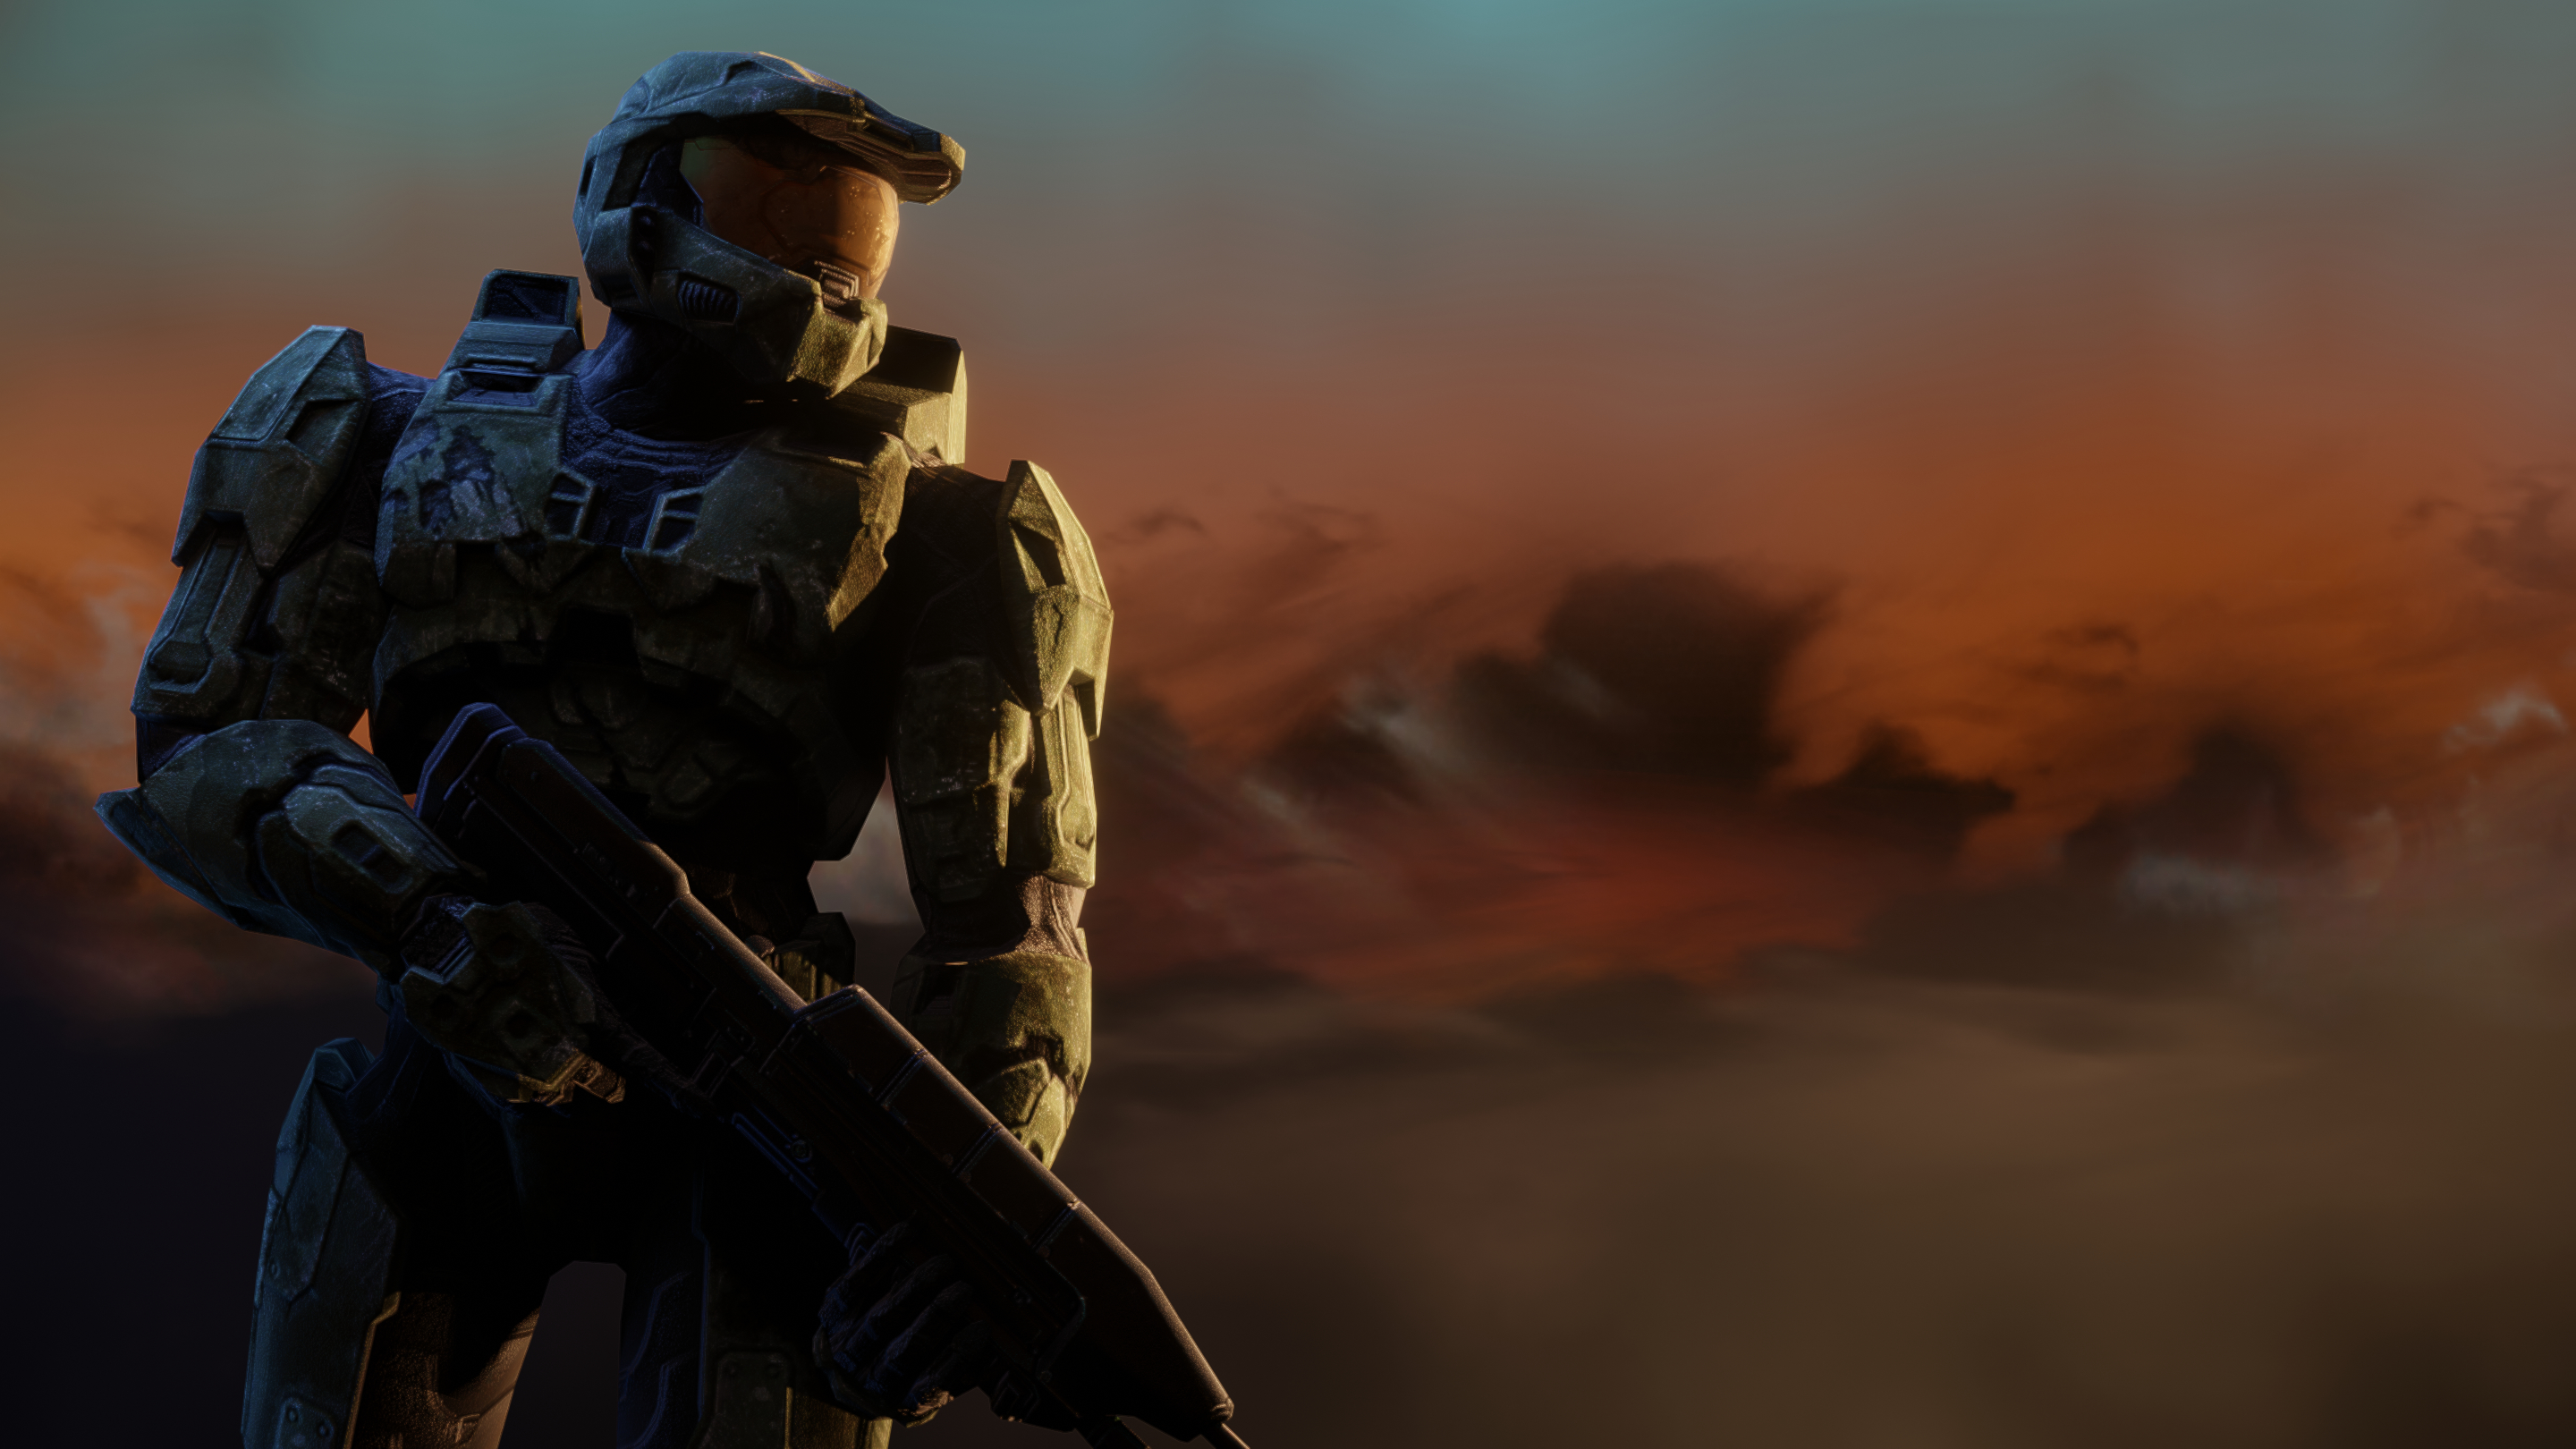 Halo 3 5K Wallpaper, HD Games 4K Wallpapers, Images and Background ...